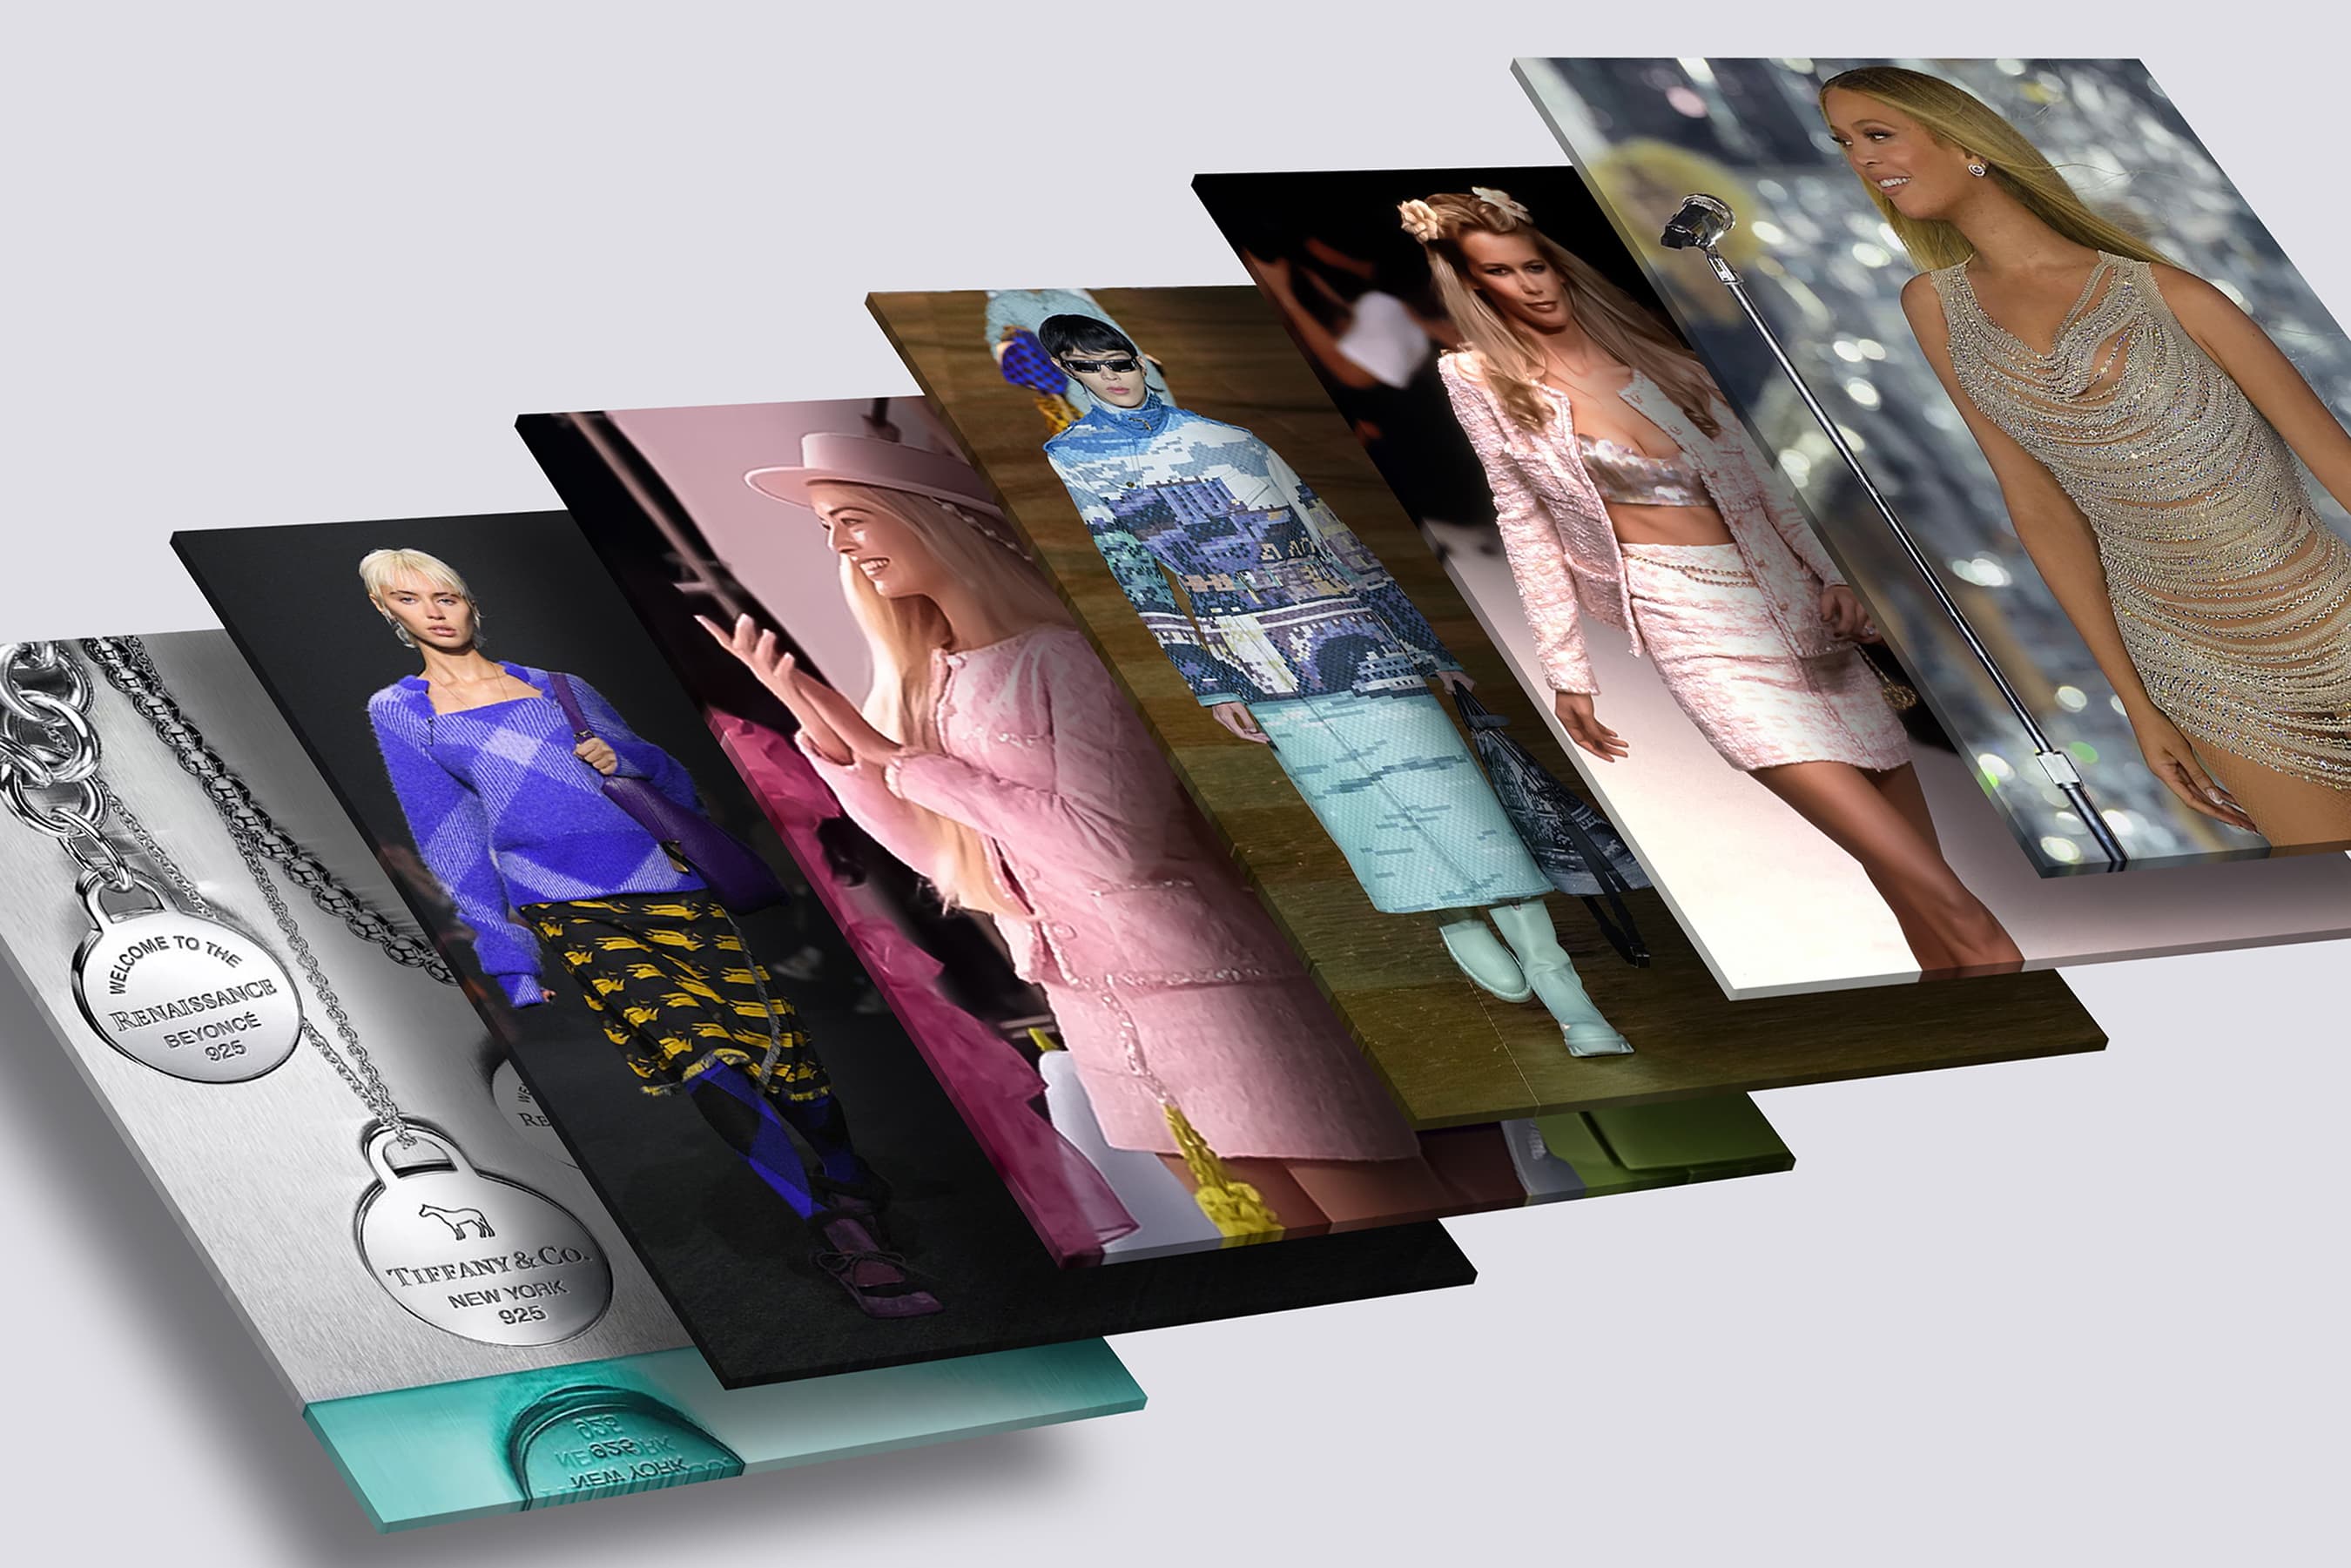 How Legacy Labels & Heritage Brands Are Reinventing Themselves in Q3 header image with photos of Burberry, Chanel, and Tiffany & Co.